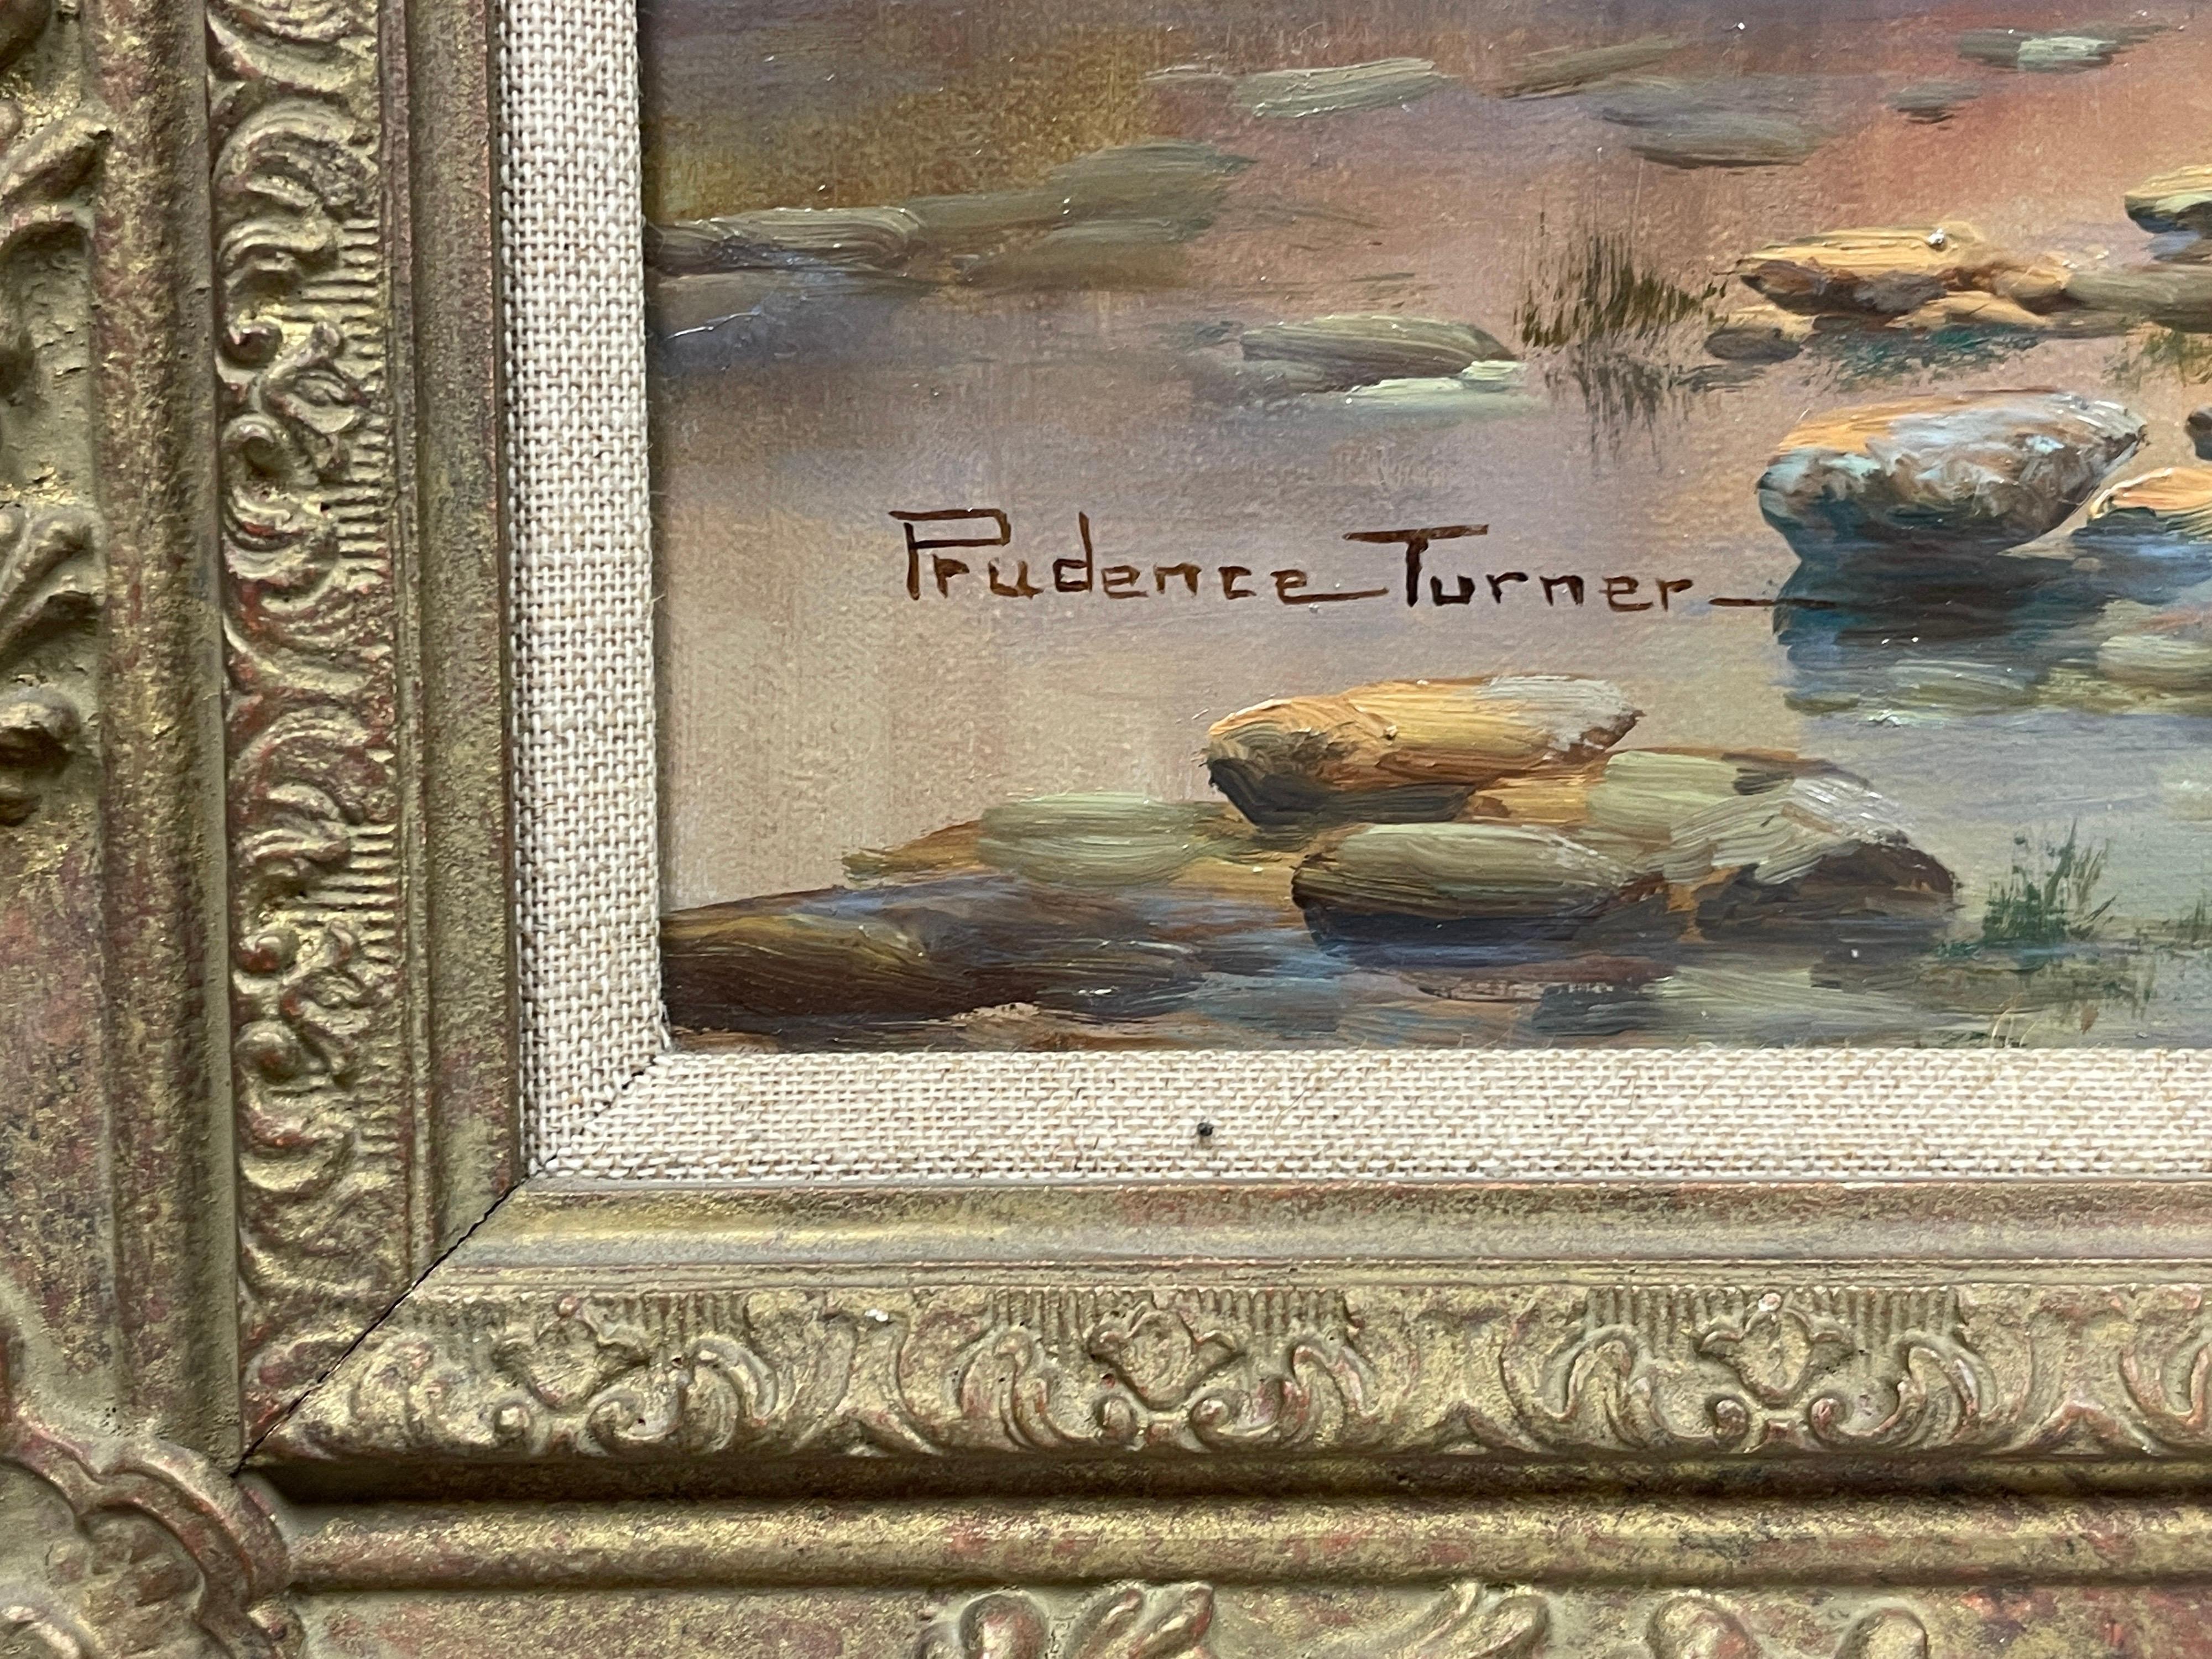 Large Signed Original Oil - Scottish Highlands Loch with Cattle Watering - Victorian Painting by Prudence Turner